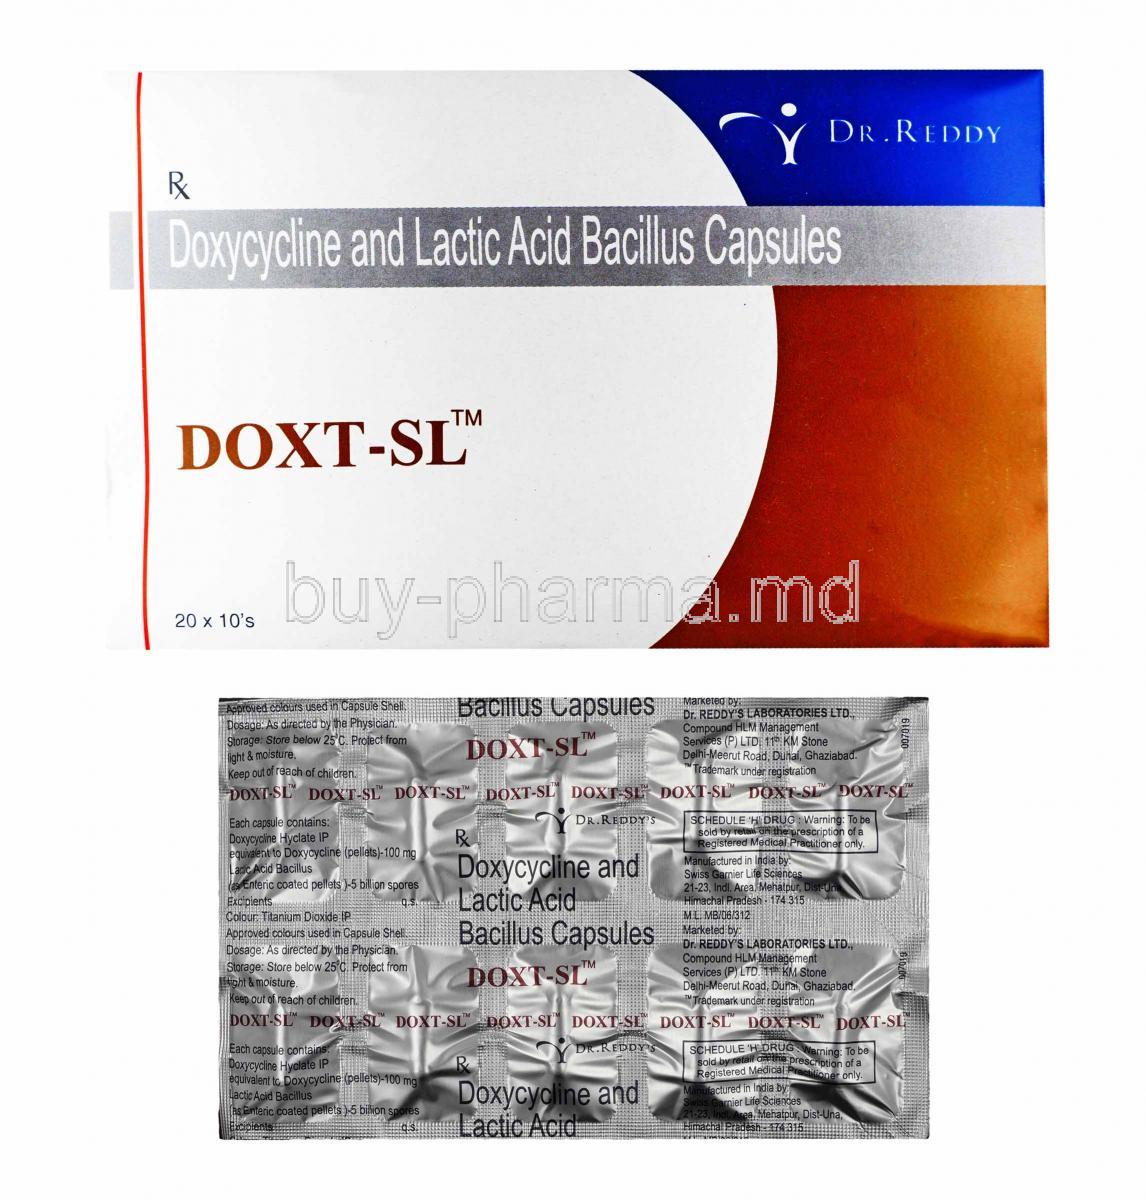 Doxt-SL, Doxycycline and Lactobacillus box and capsules